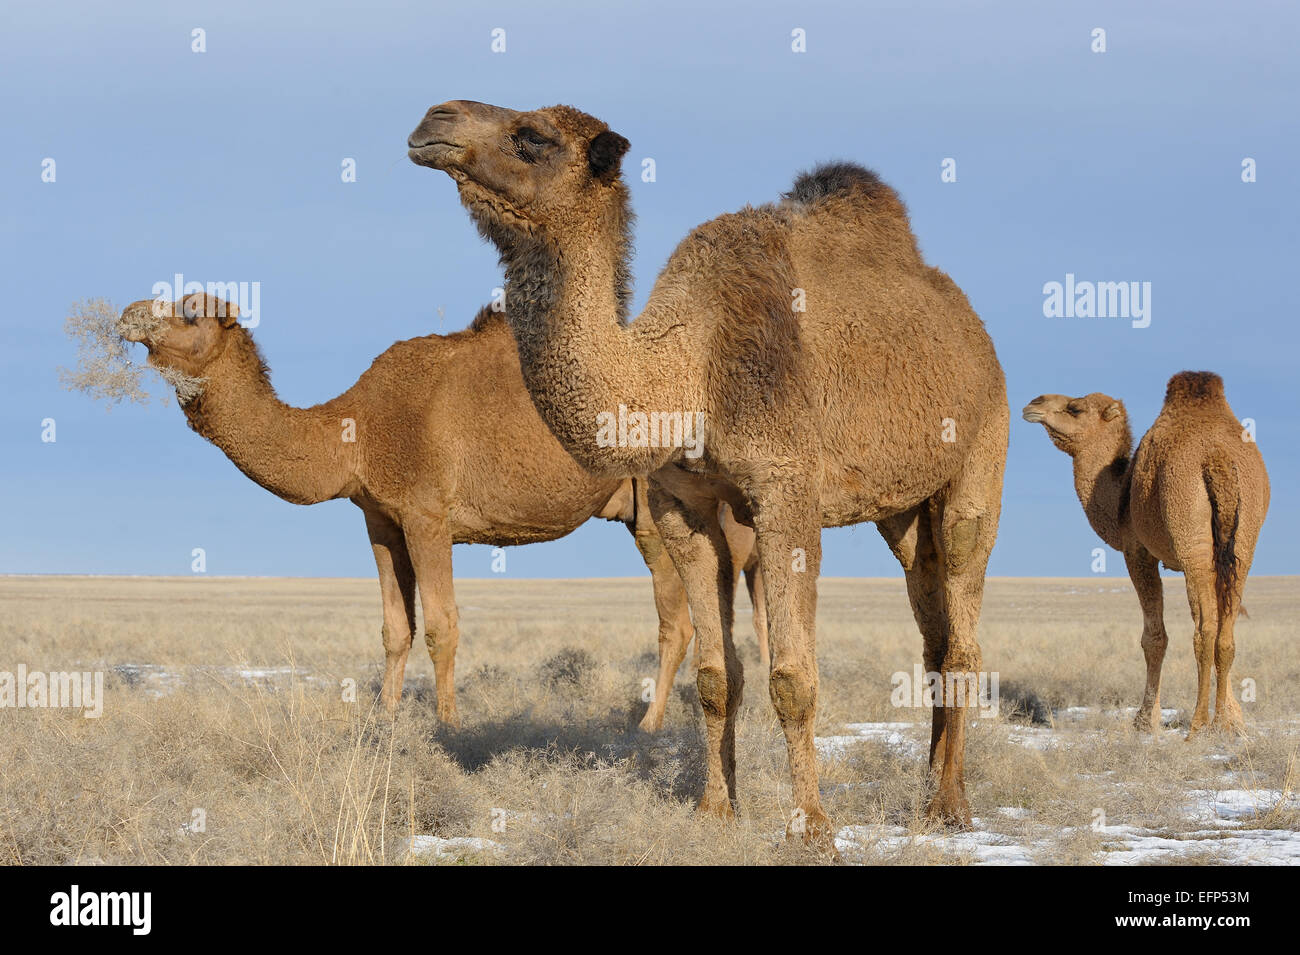 The Dromader camels in Asian steppe Stock Photo